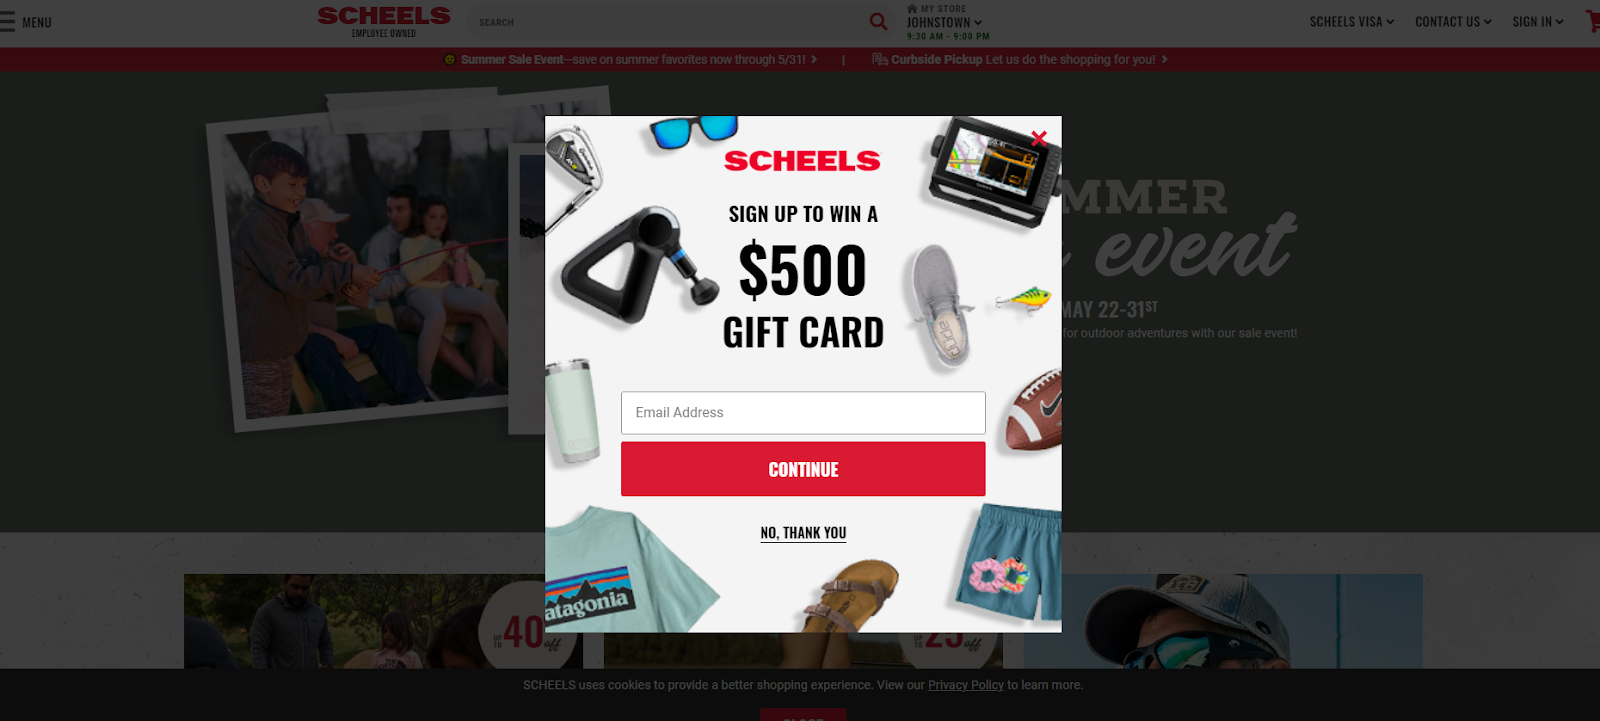 Scheels splash page is a small, centrally located box, that invites visitors to sign up